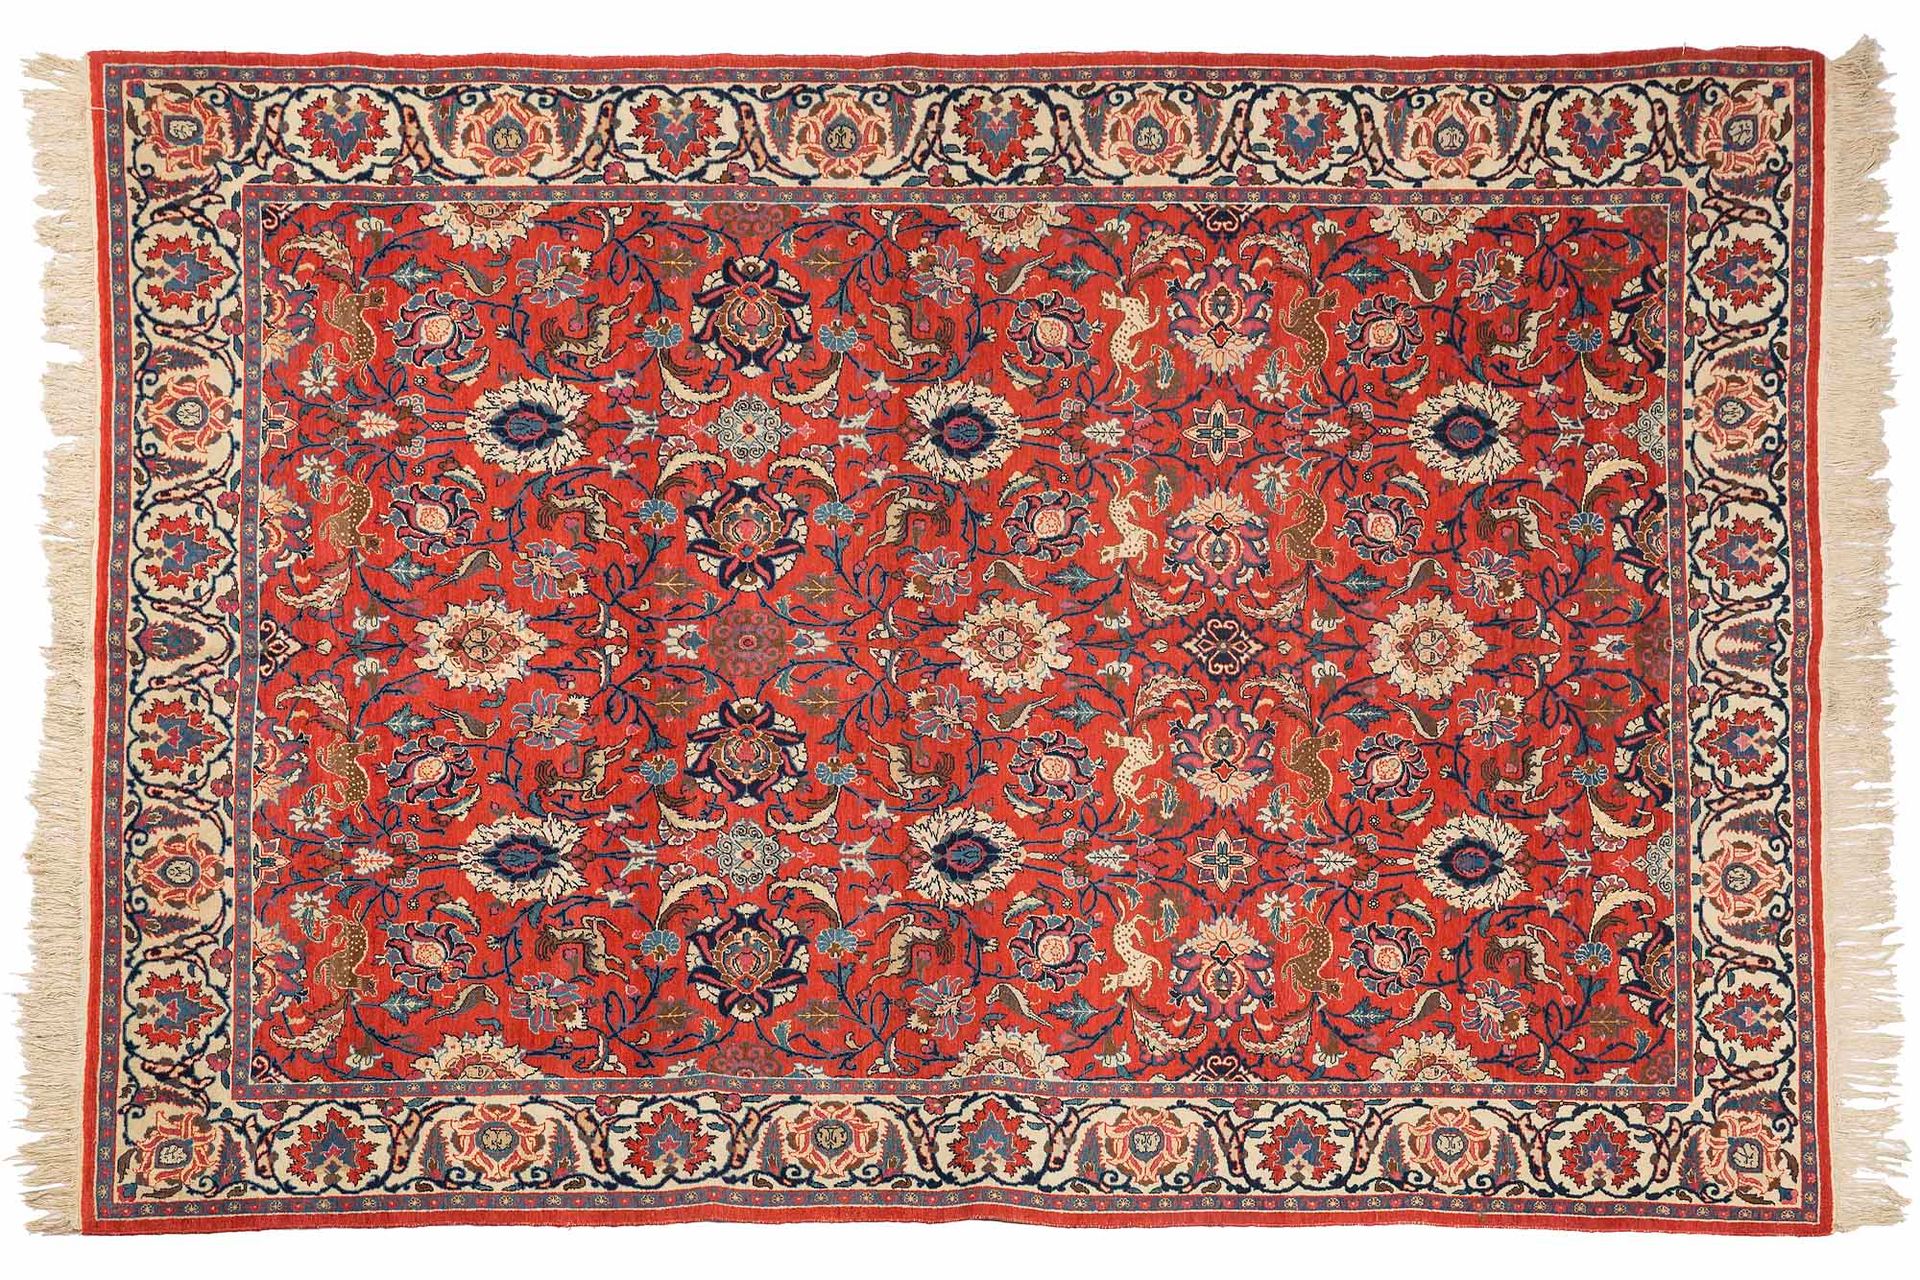 Null Tapis ISPAHAN (Perse), 1er tiers du 20e siècle

Dimensions : 307 x 199cm.

&hellip;